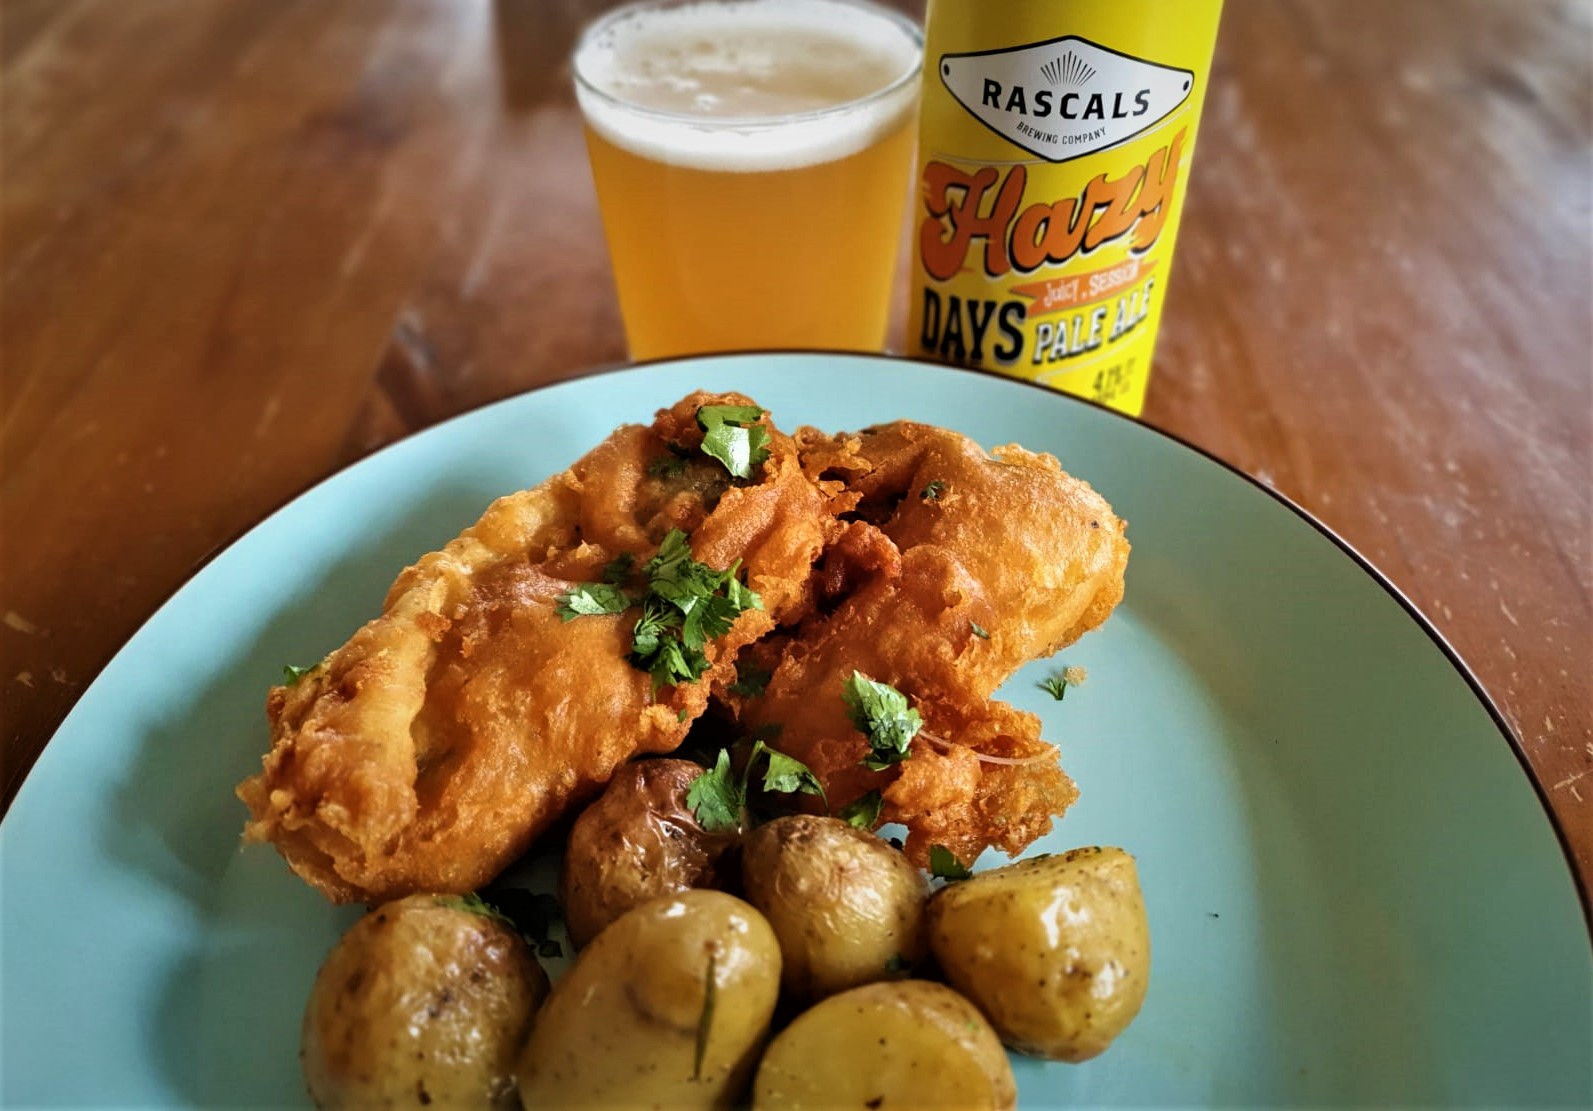 Beer recipes from Rascals Brewing company, using fresh Irish craft beer